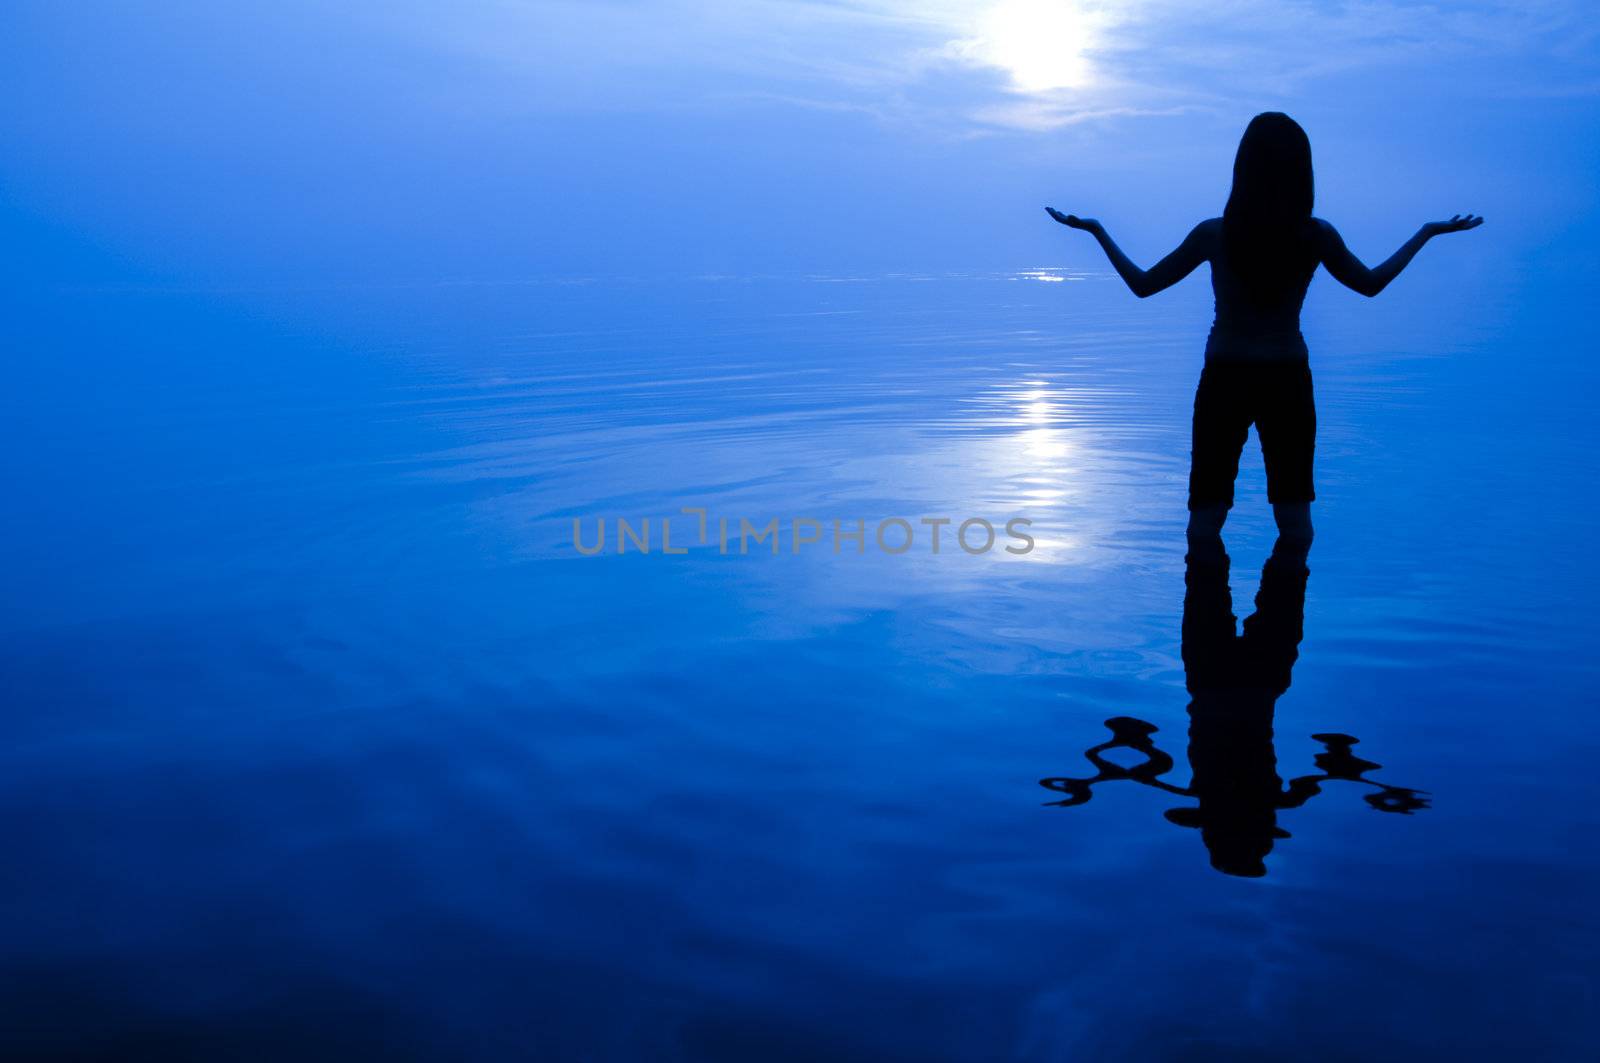 Abstract women silhouette in the sea looking at sun with arms open.